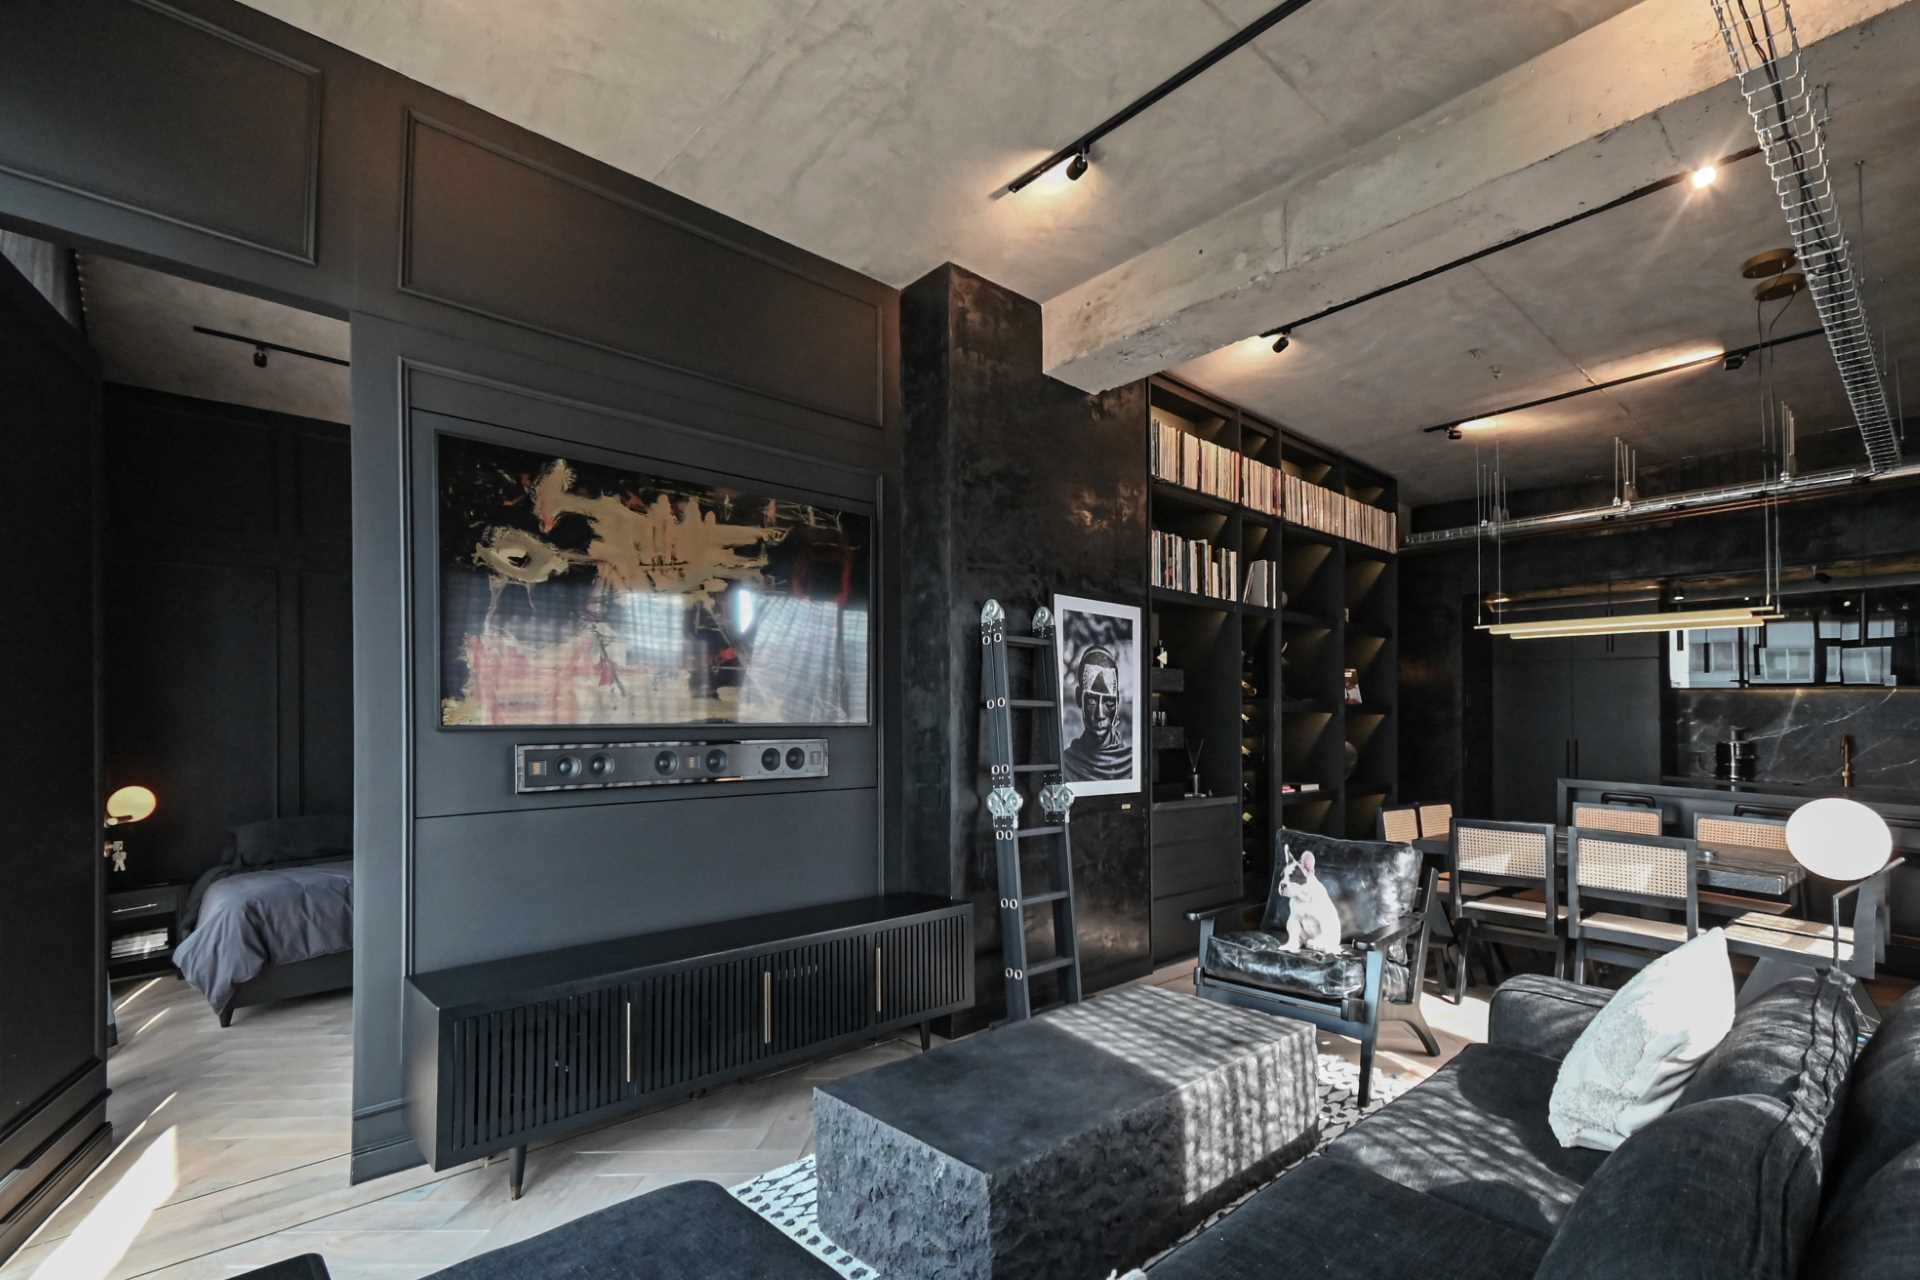 A modern black apartment interior with an open plan living room, dining area, and kitchen.